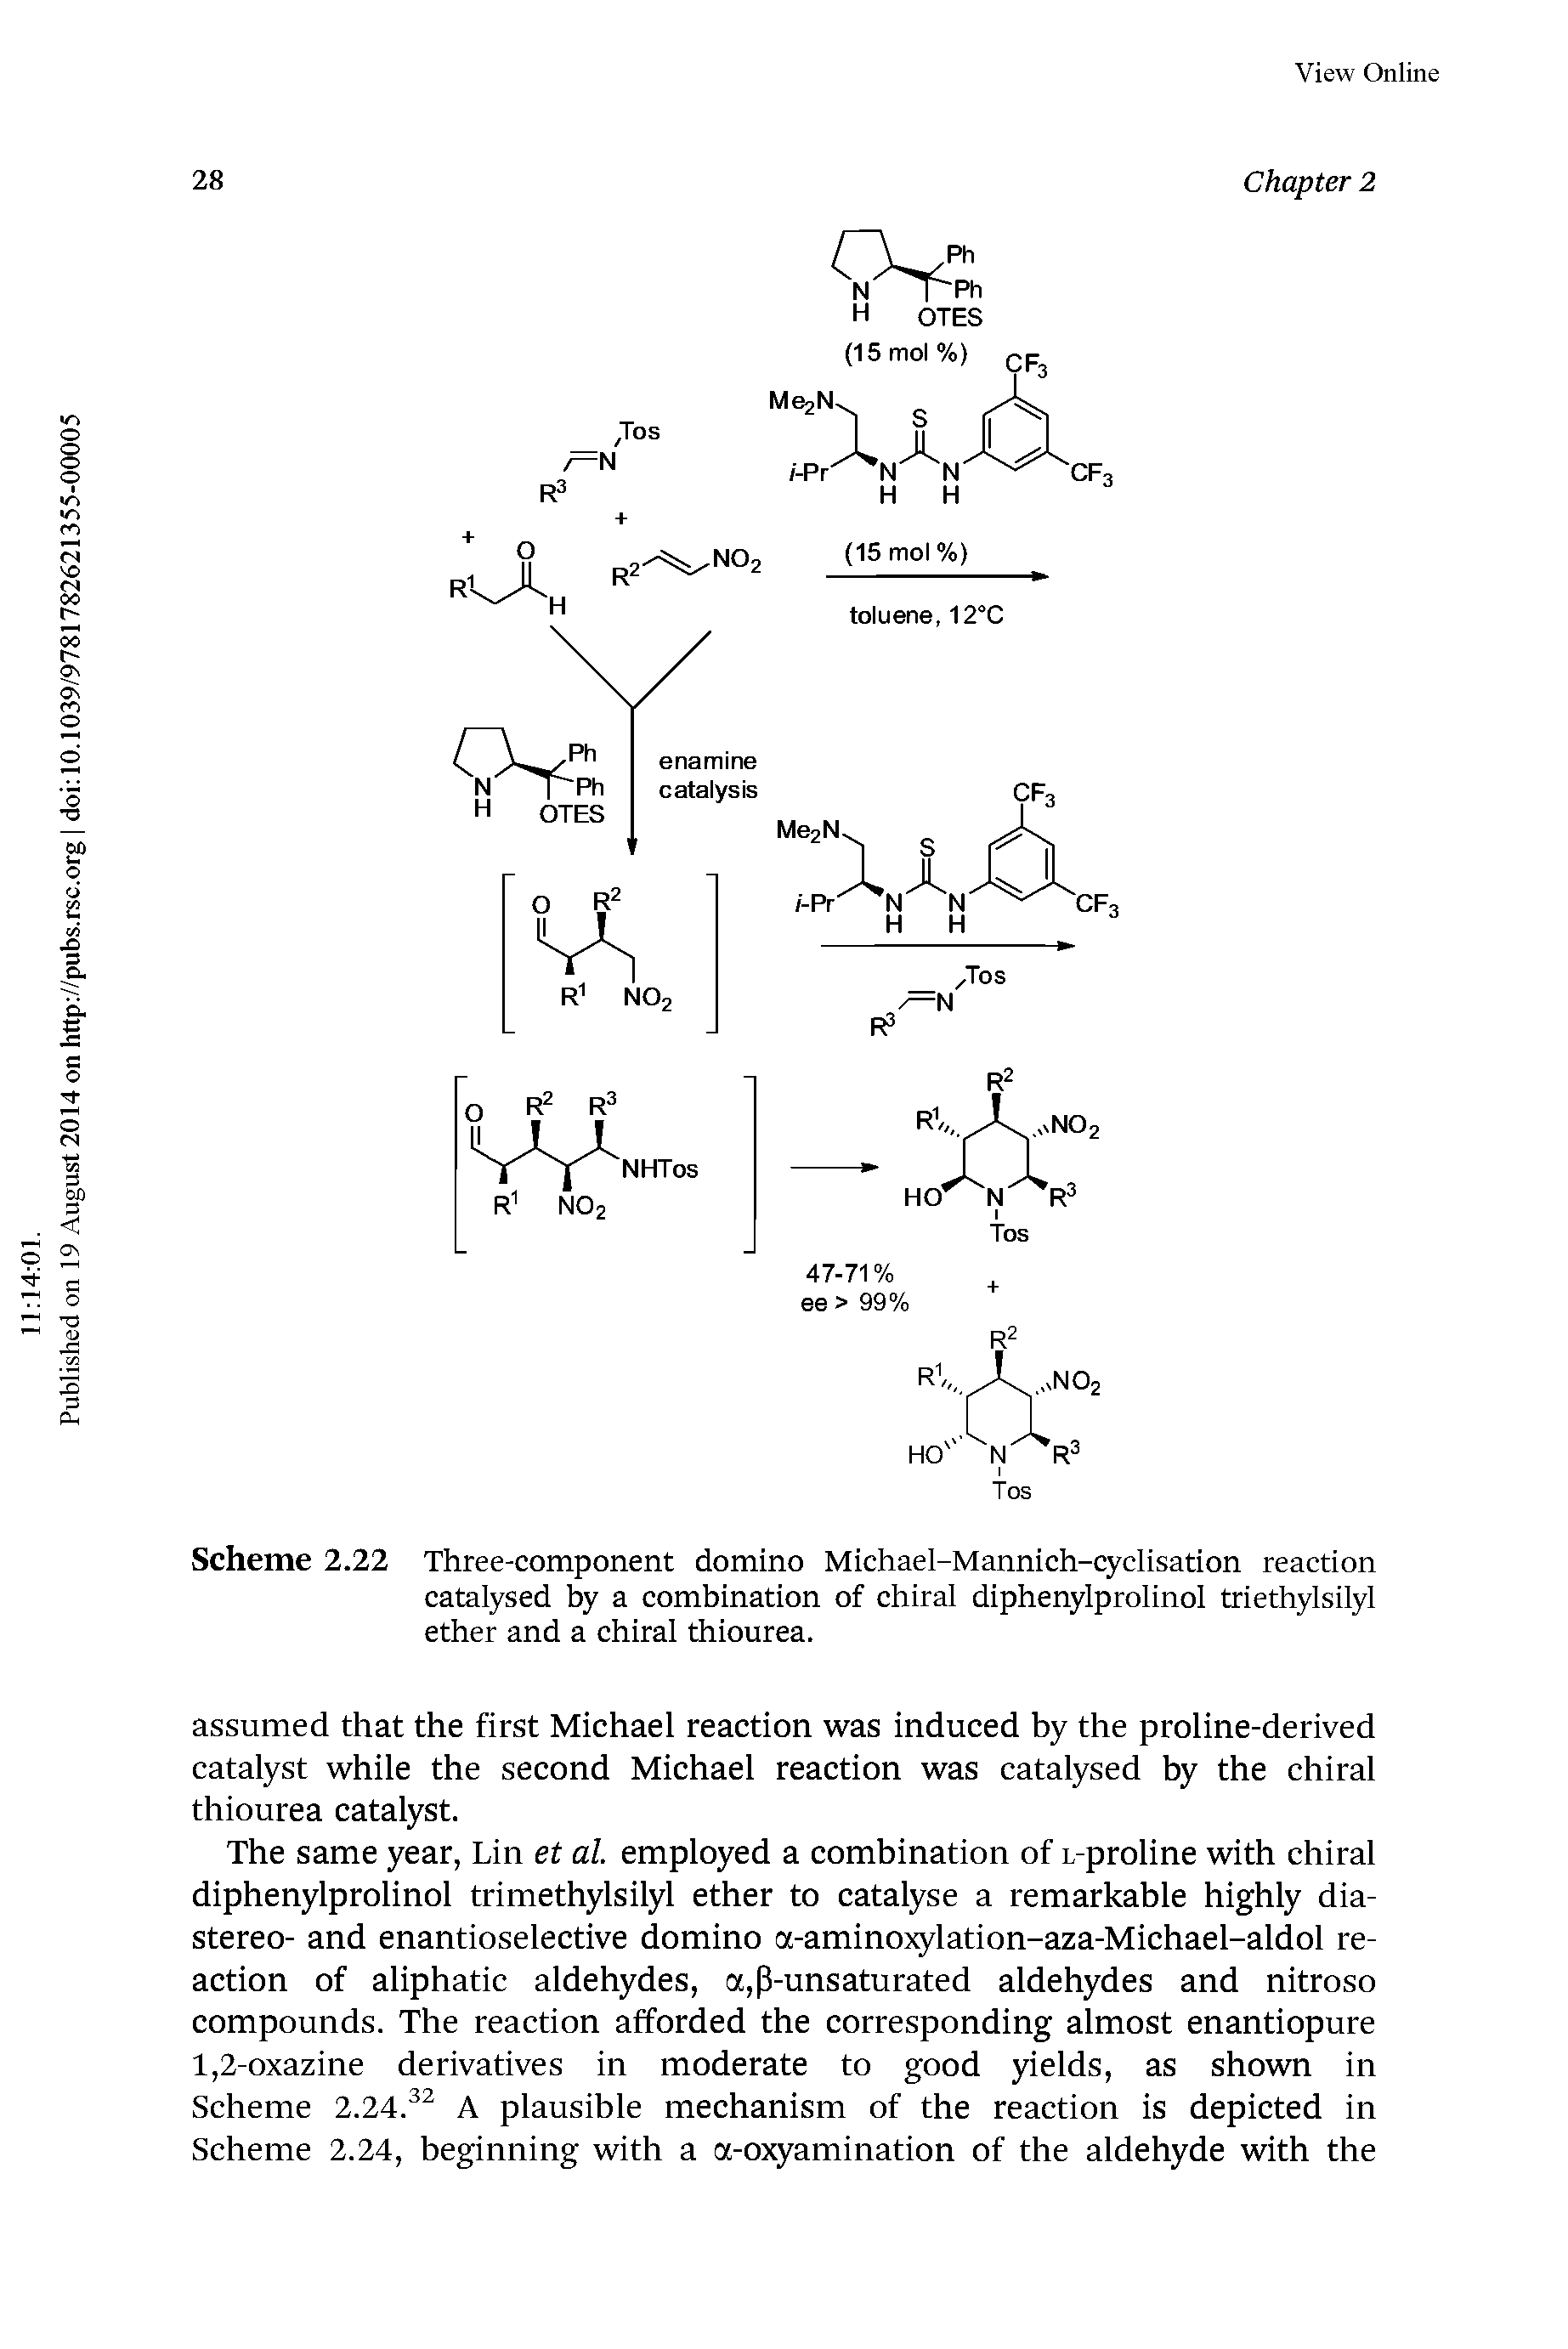 Scheme 2.22 Three-component domino Michael-Mannich-cyclisation reaction catalysed by a combination of chiral diphenylprolinol triethylsilyl ether and a chiral thiourea.